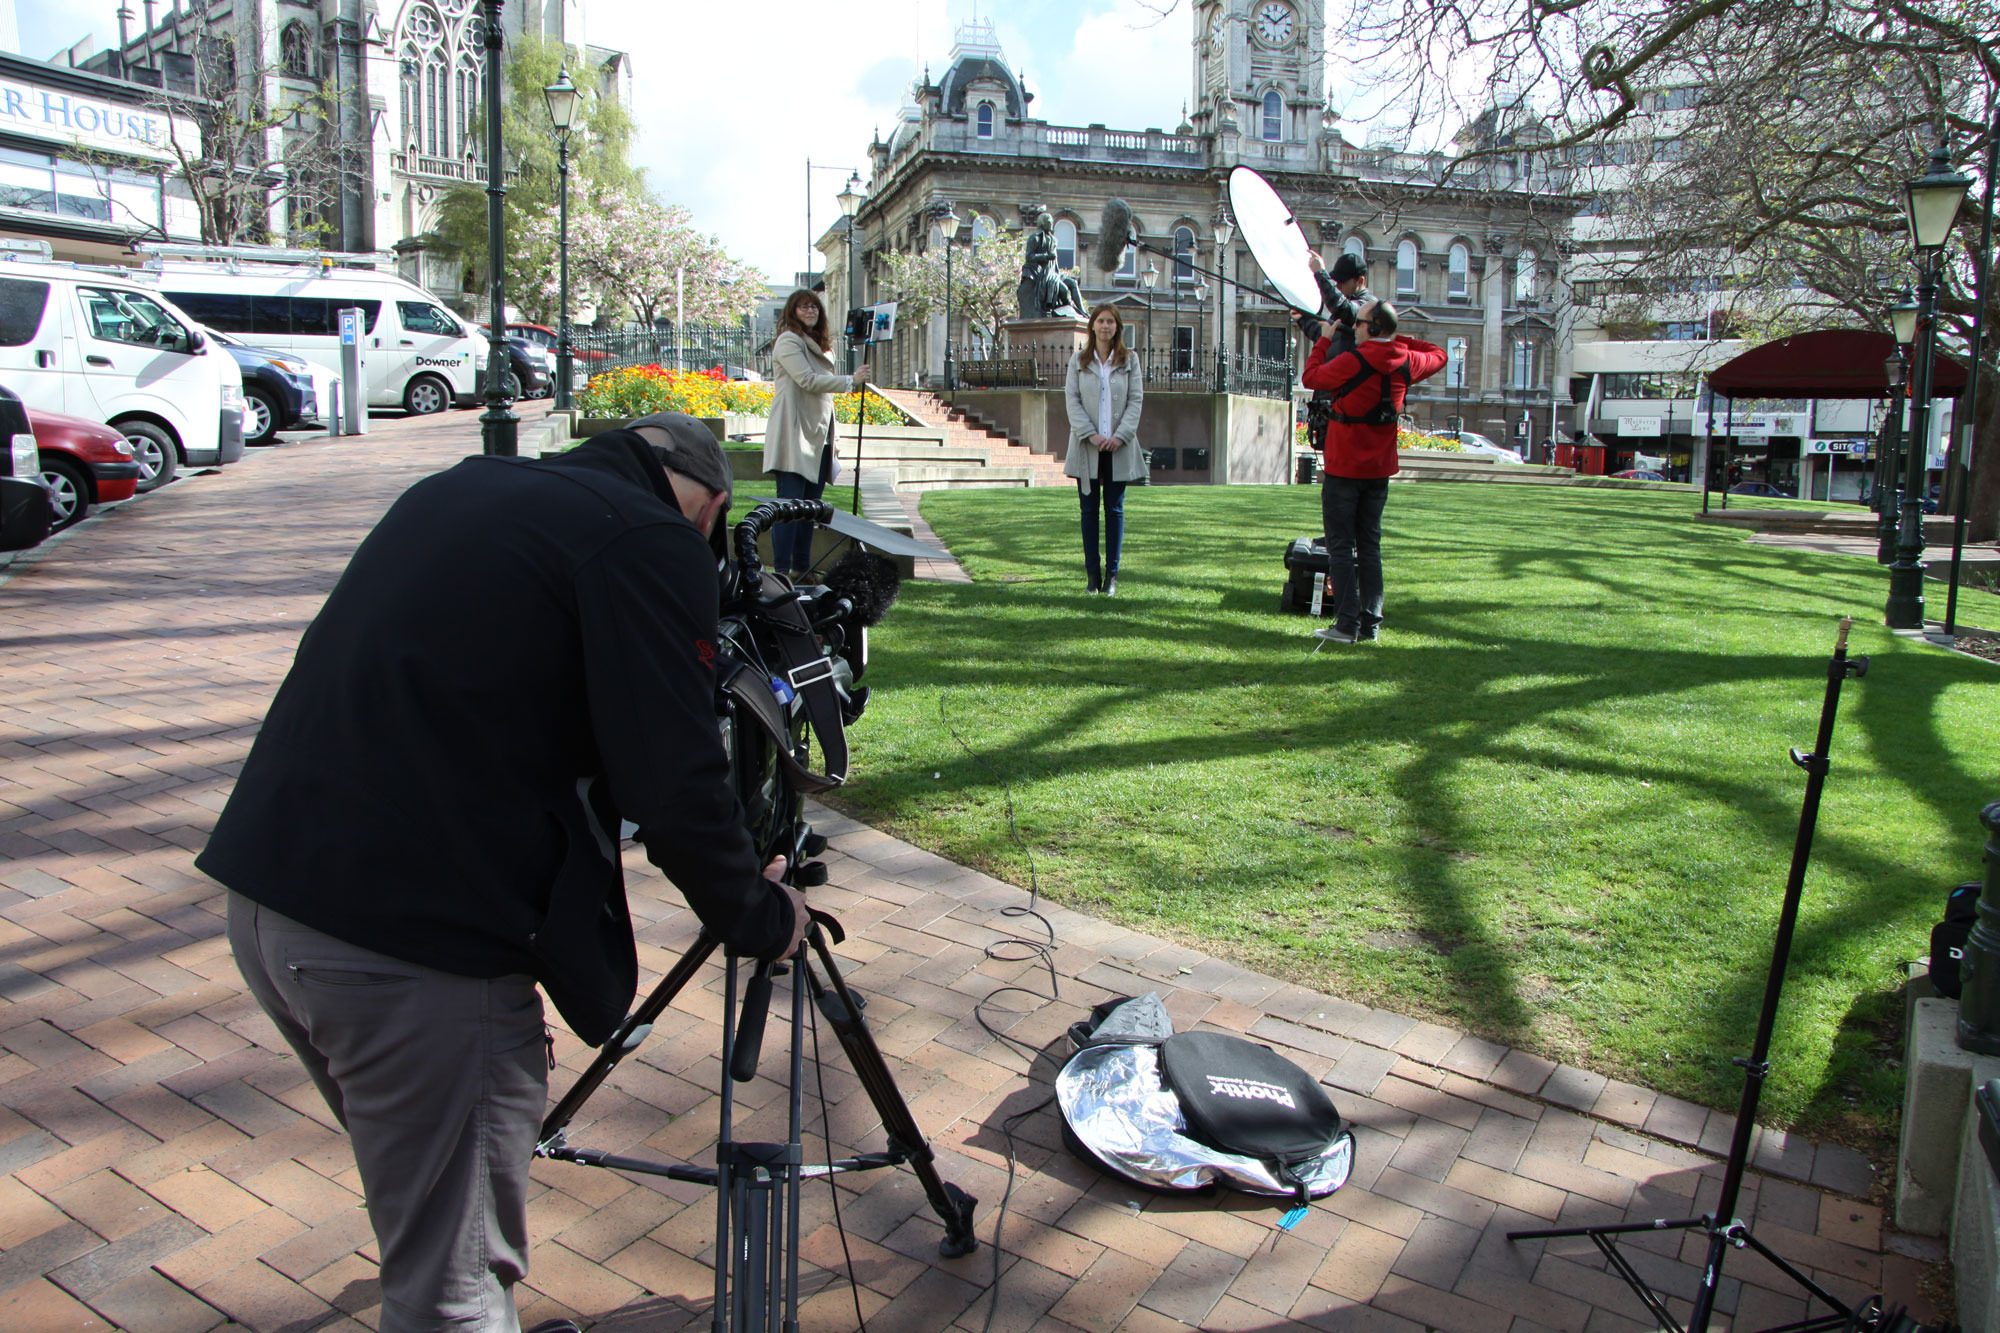 filming on the lawn outside parliament